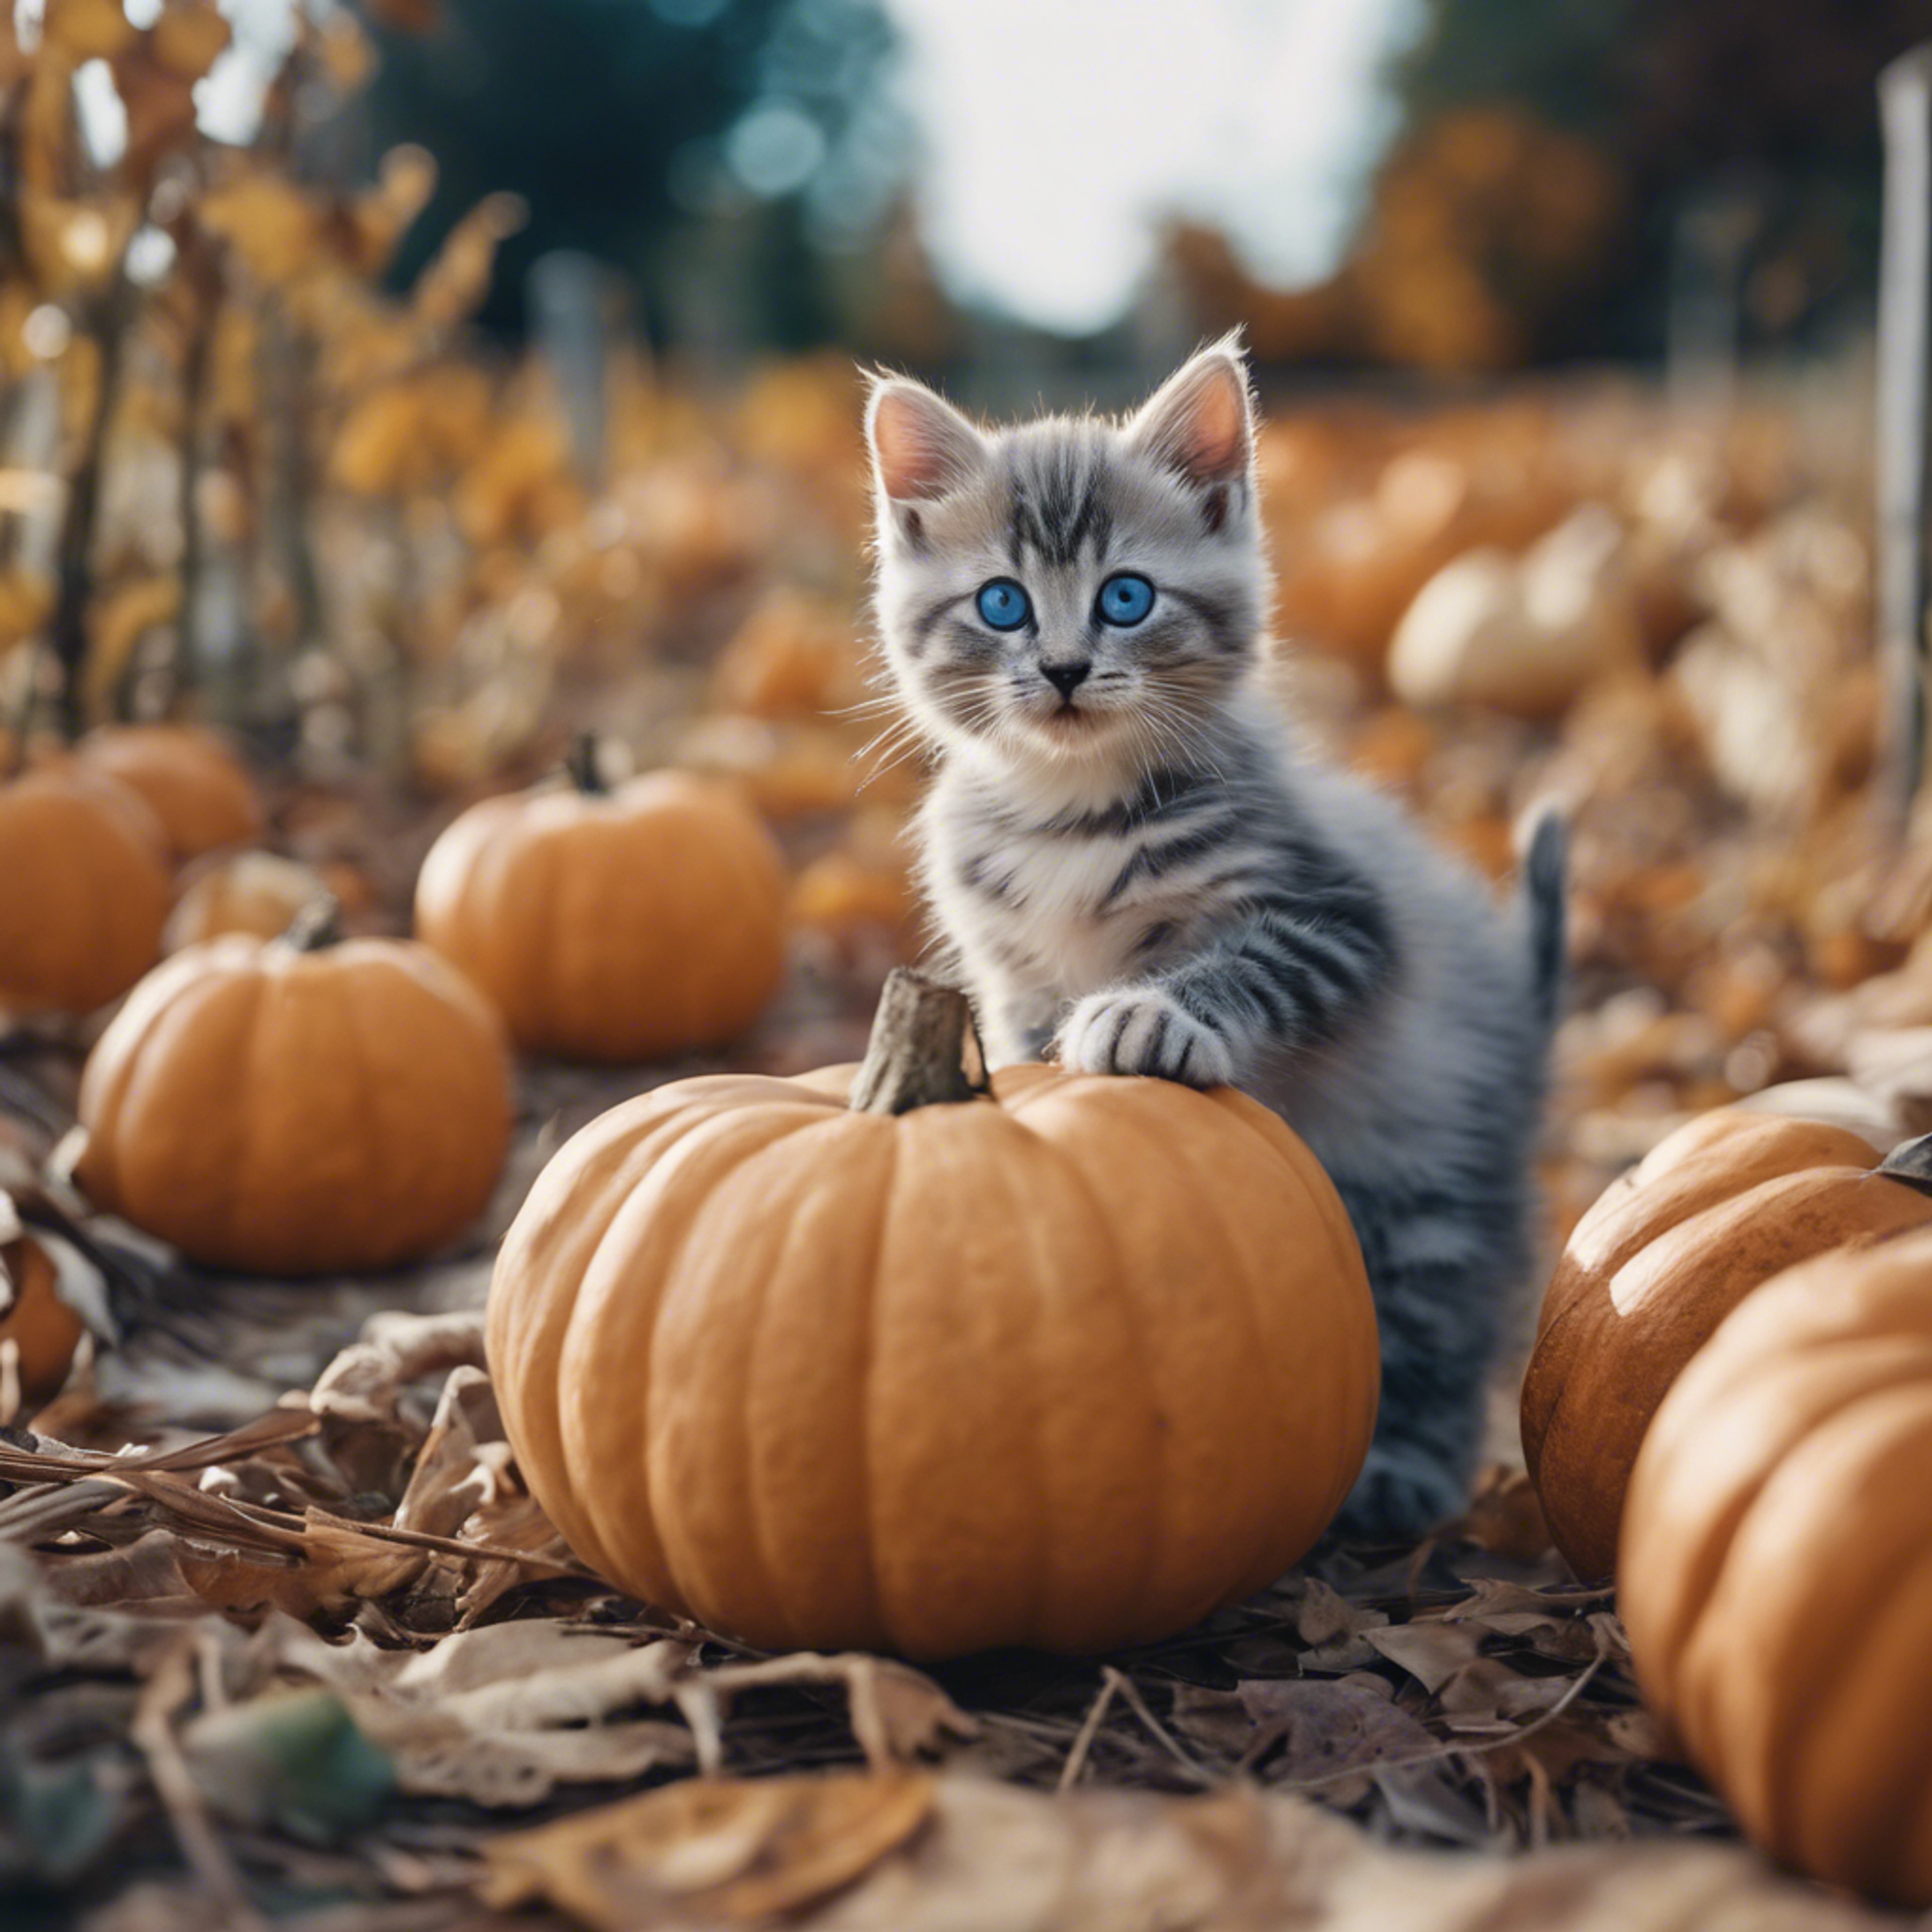 A small blue-eyed Cheetoh kitten exploring a pumpkin patch on an invitingly cool fall day. Wallpaper[ee8fc80847a940e288a7]